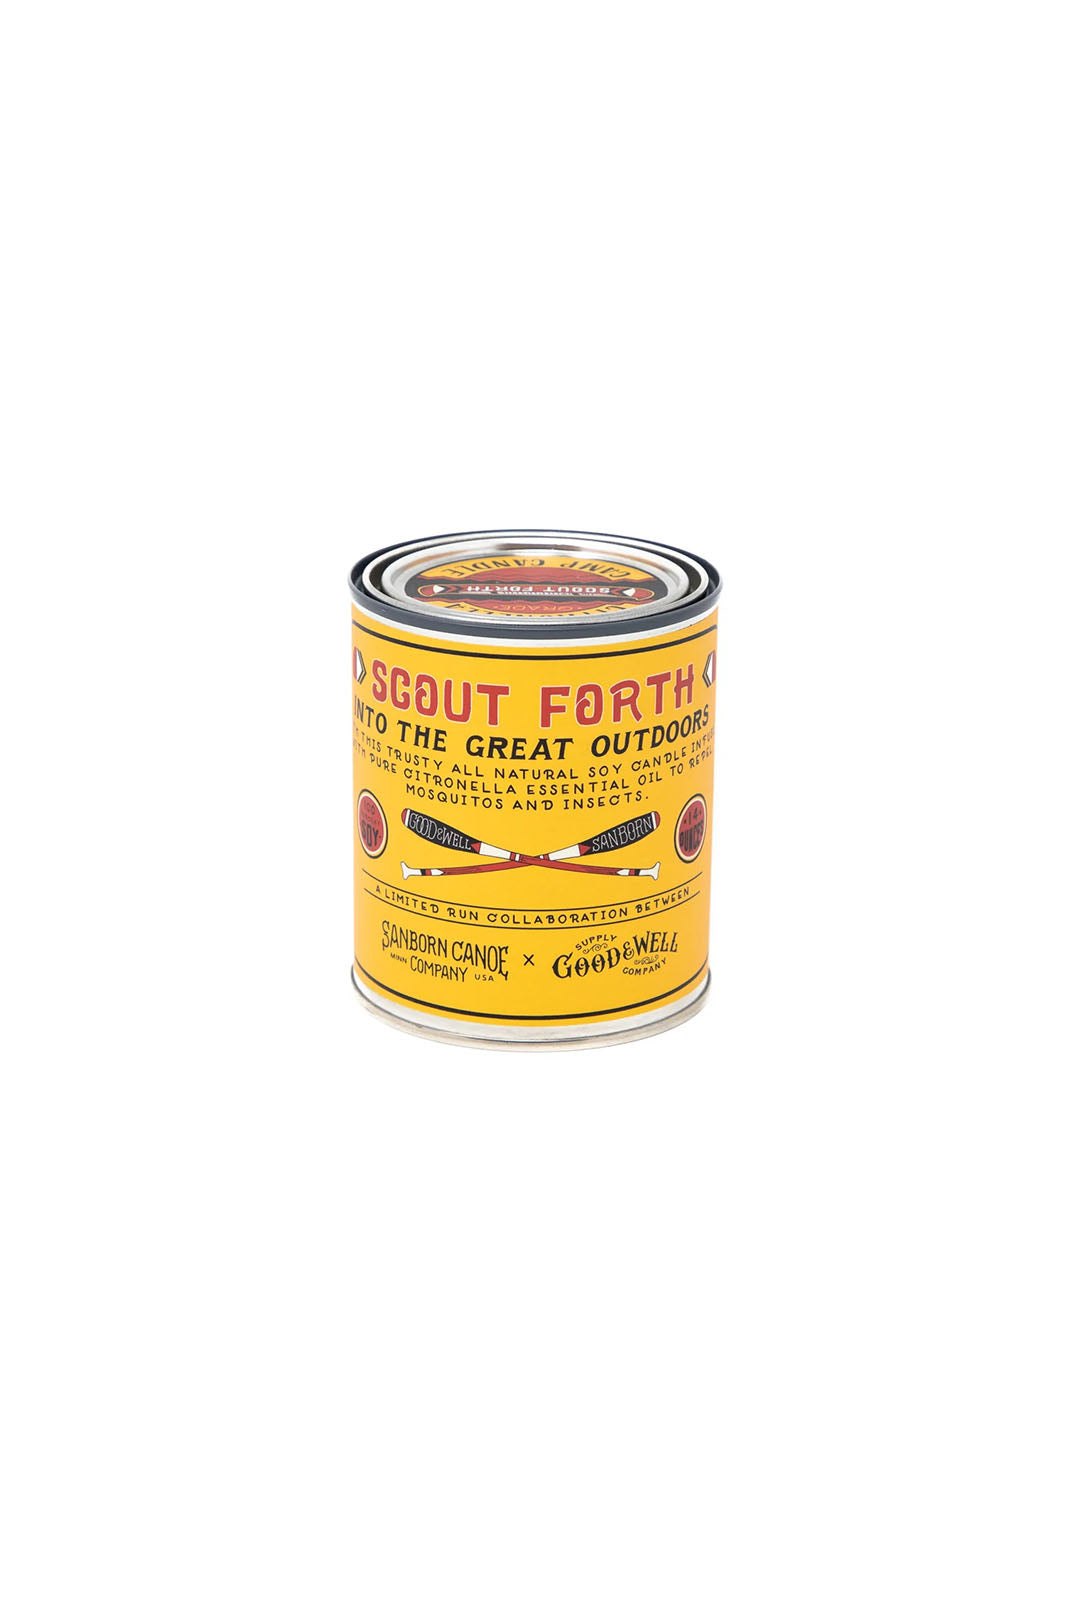 Scout Forth Citronella Camp Candle